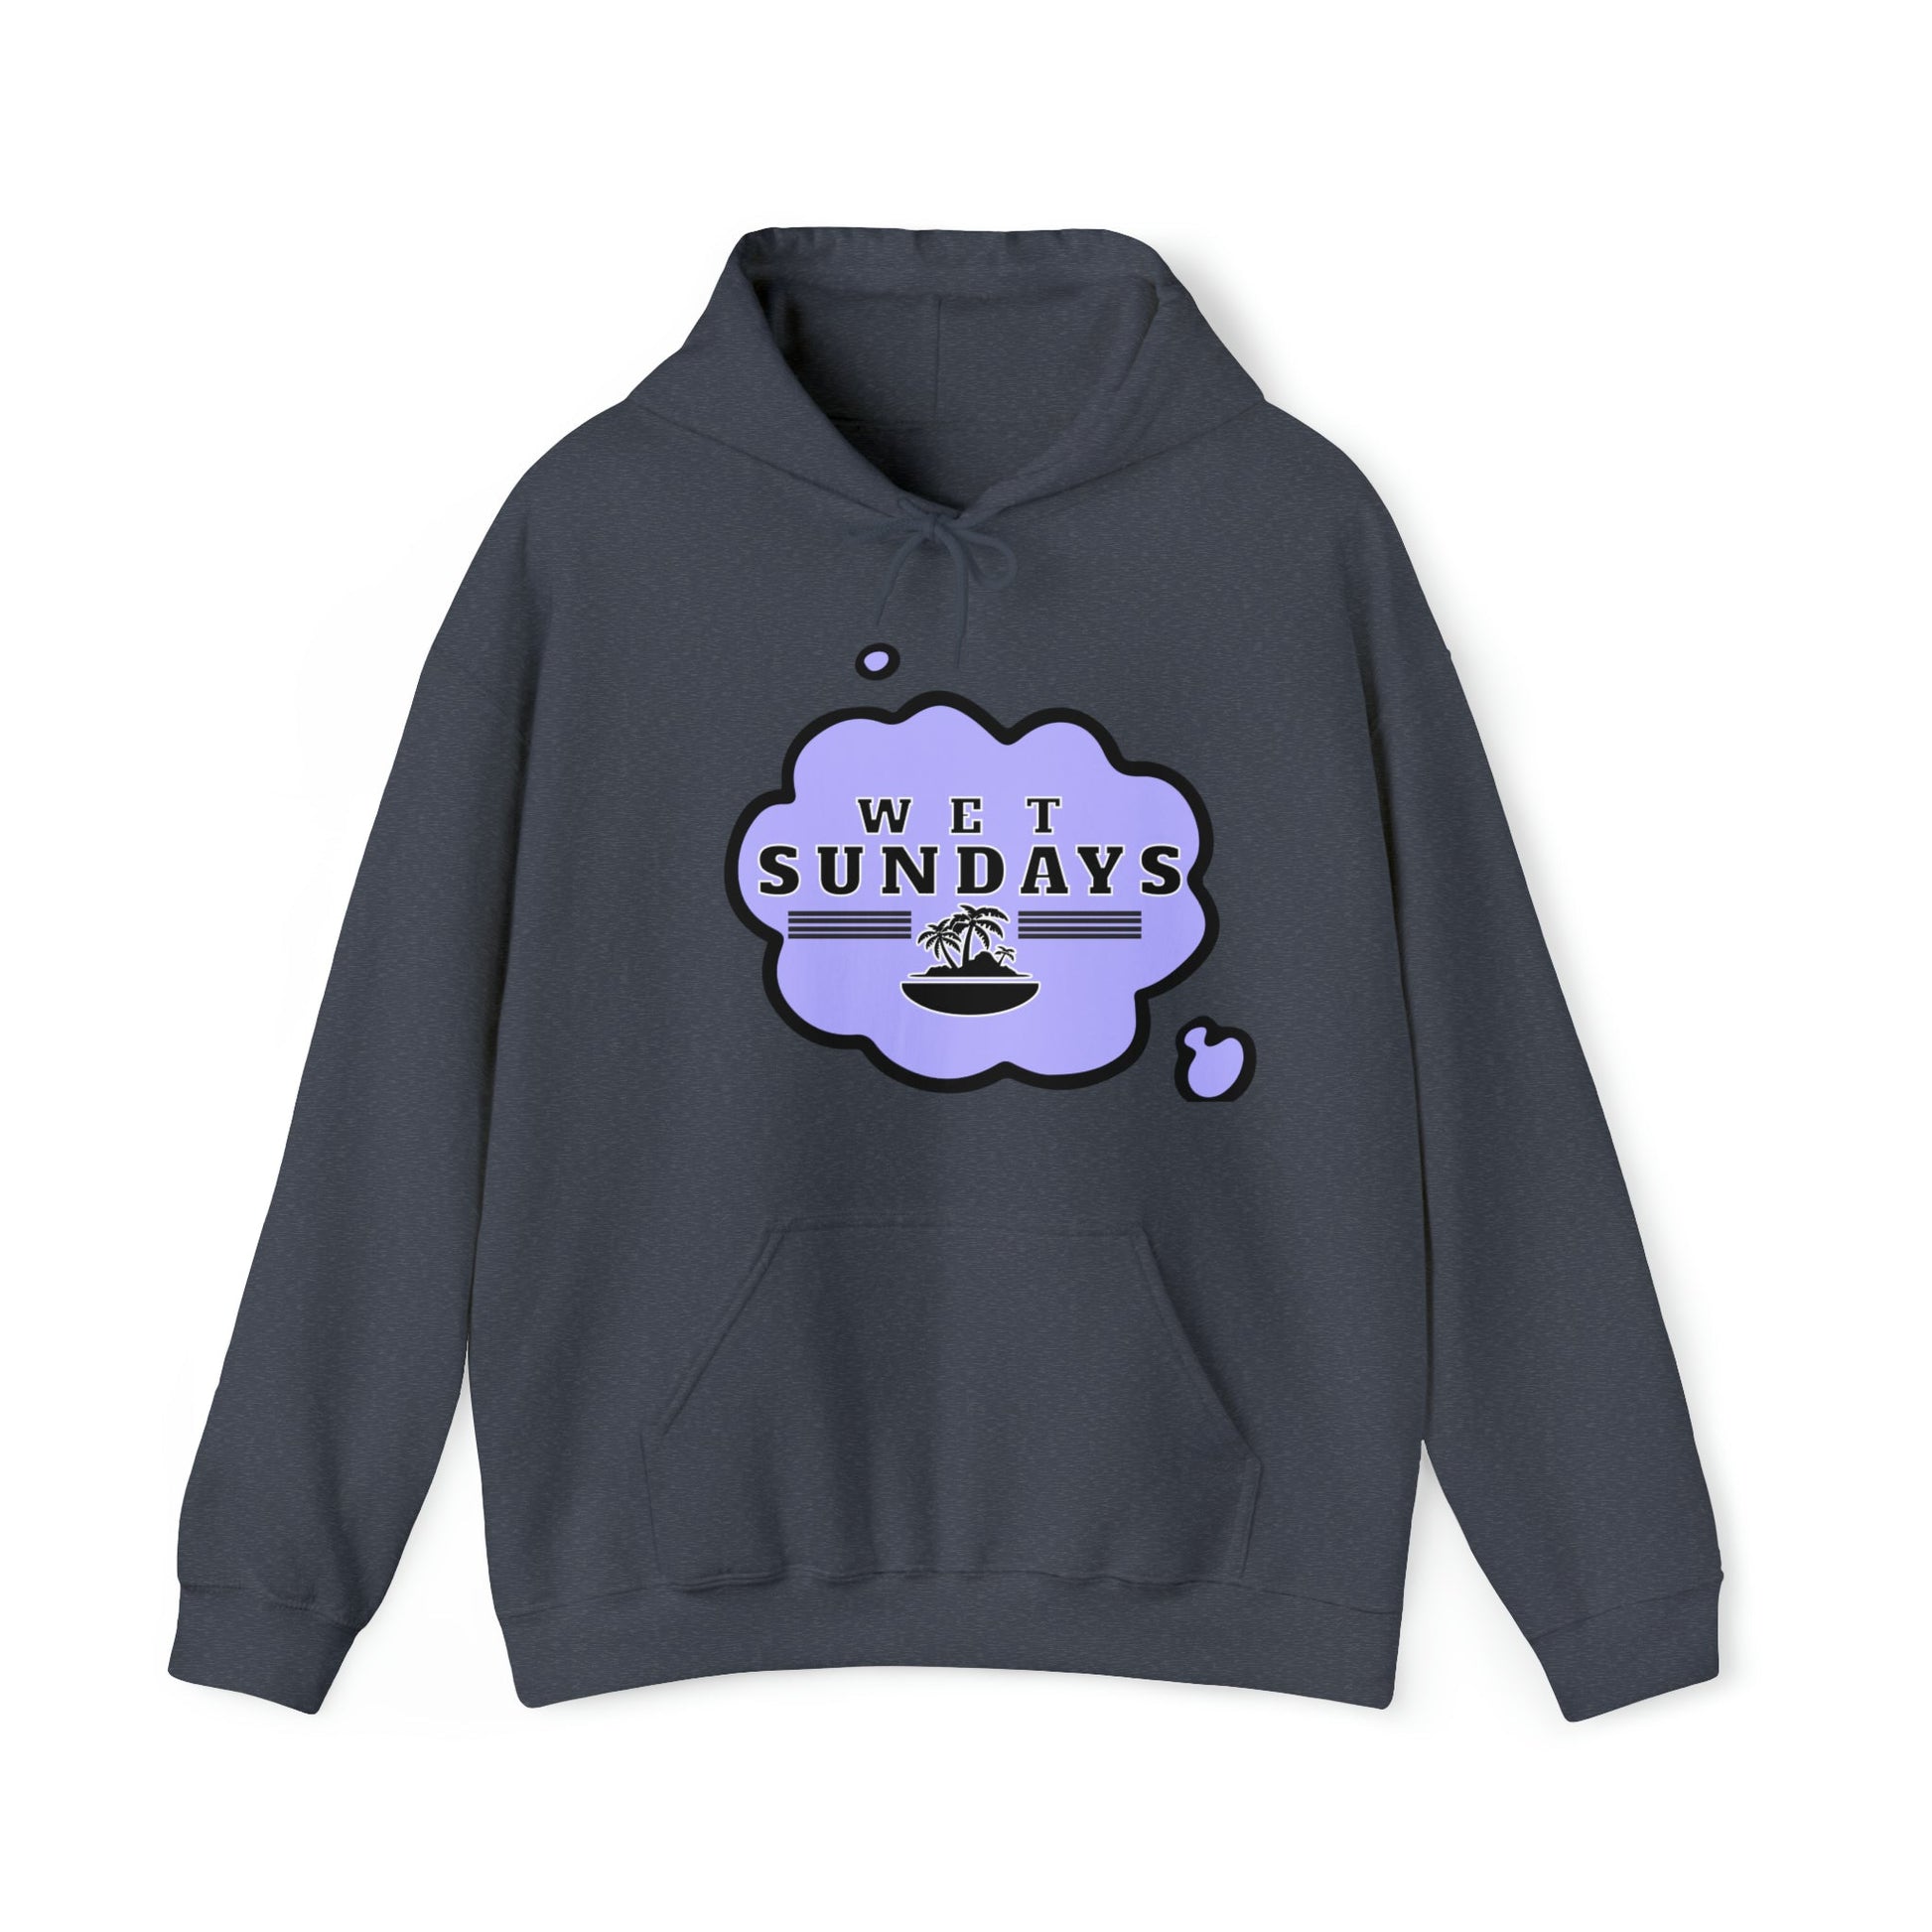 Clouded Thoughts Dark Grey Hoodie - Wet Sundays